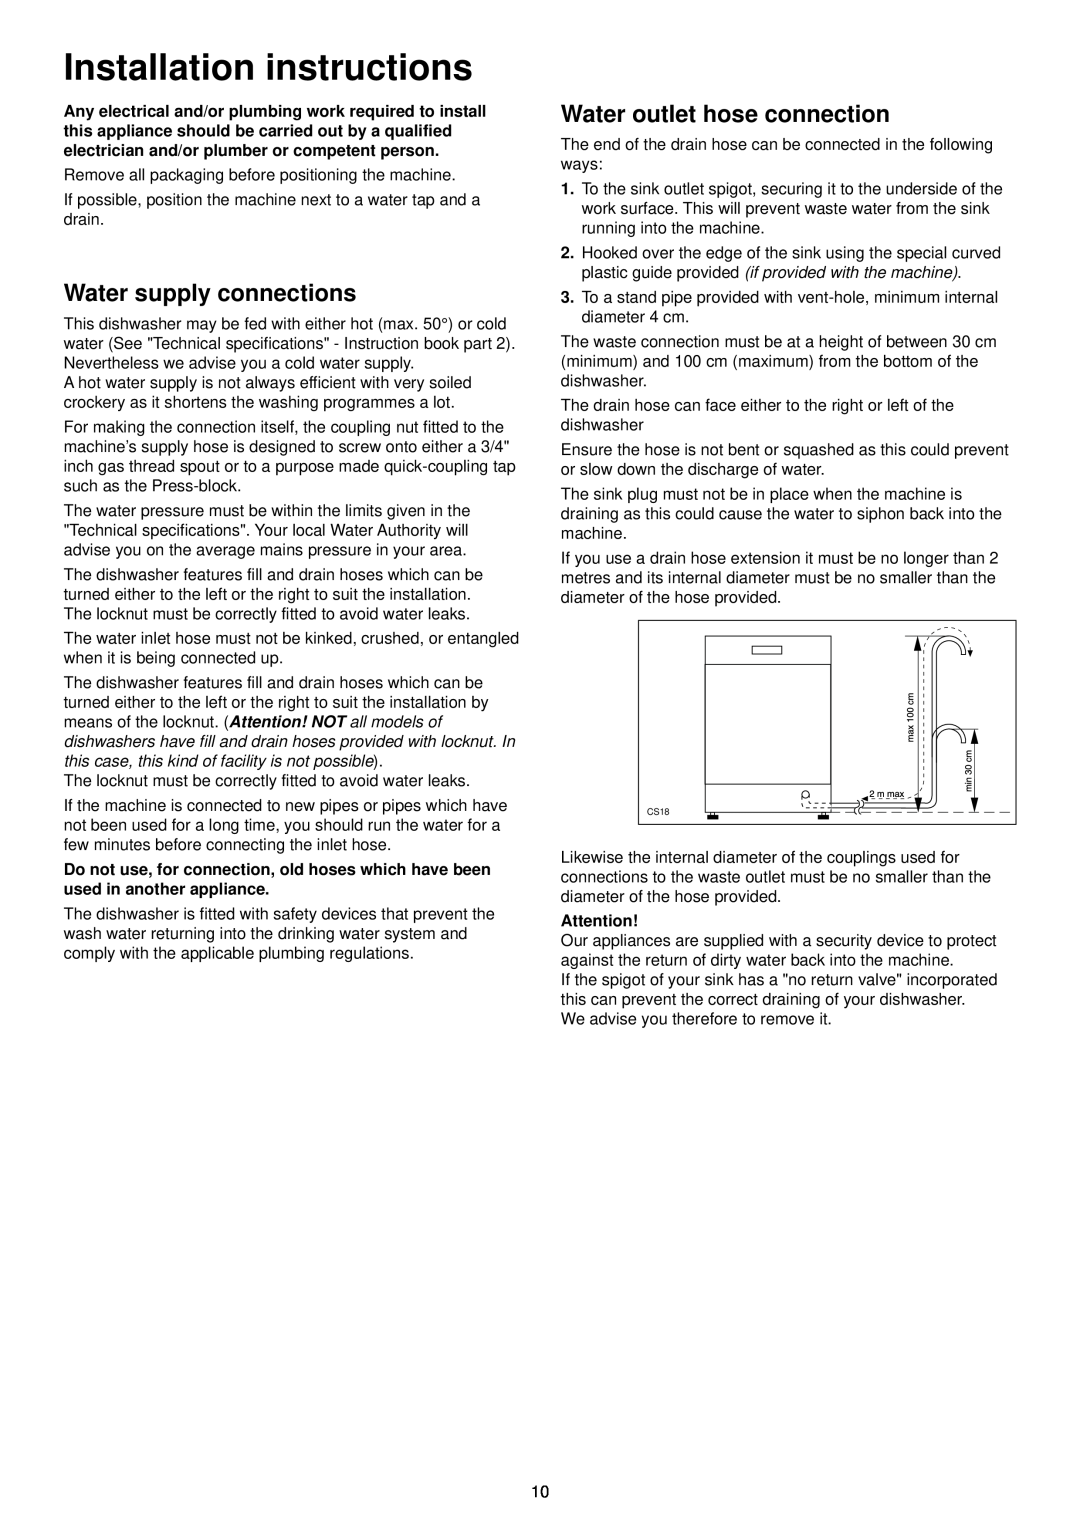 Tricity Bendix DH 103 manual Installation instructions, Water supply connections, Water outlet hose connection 